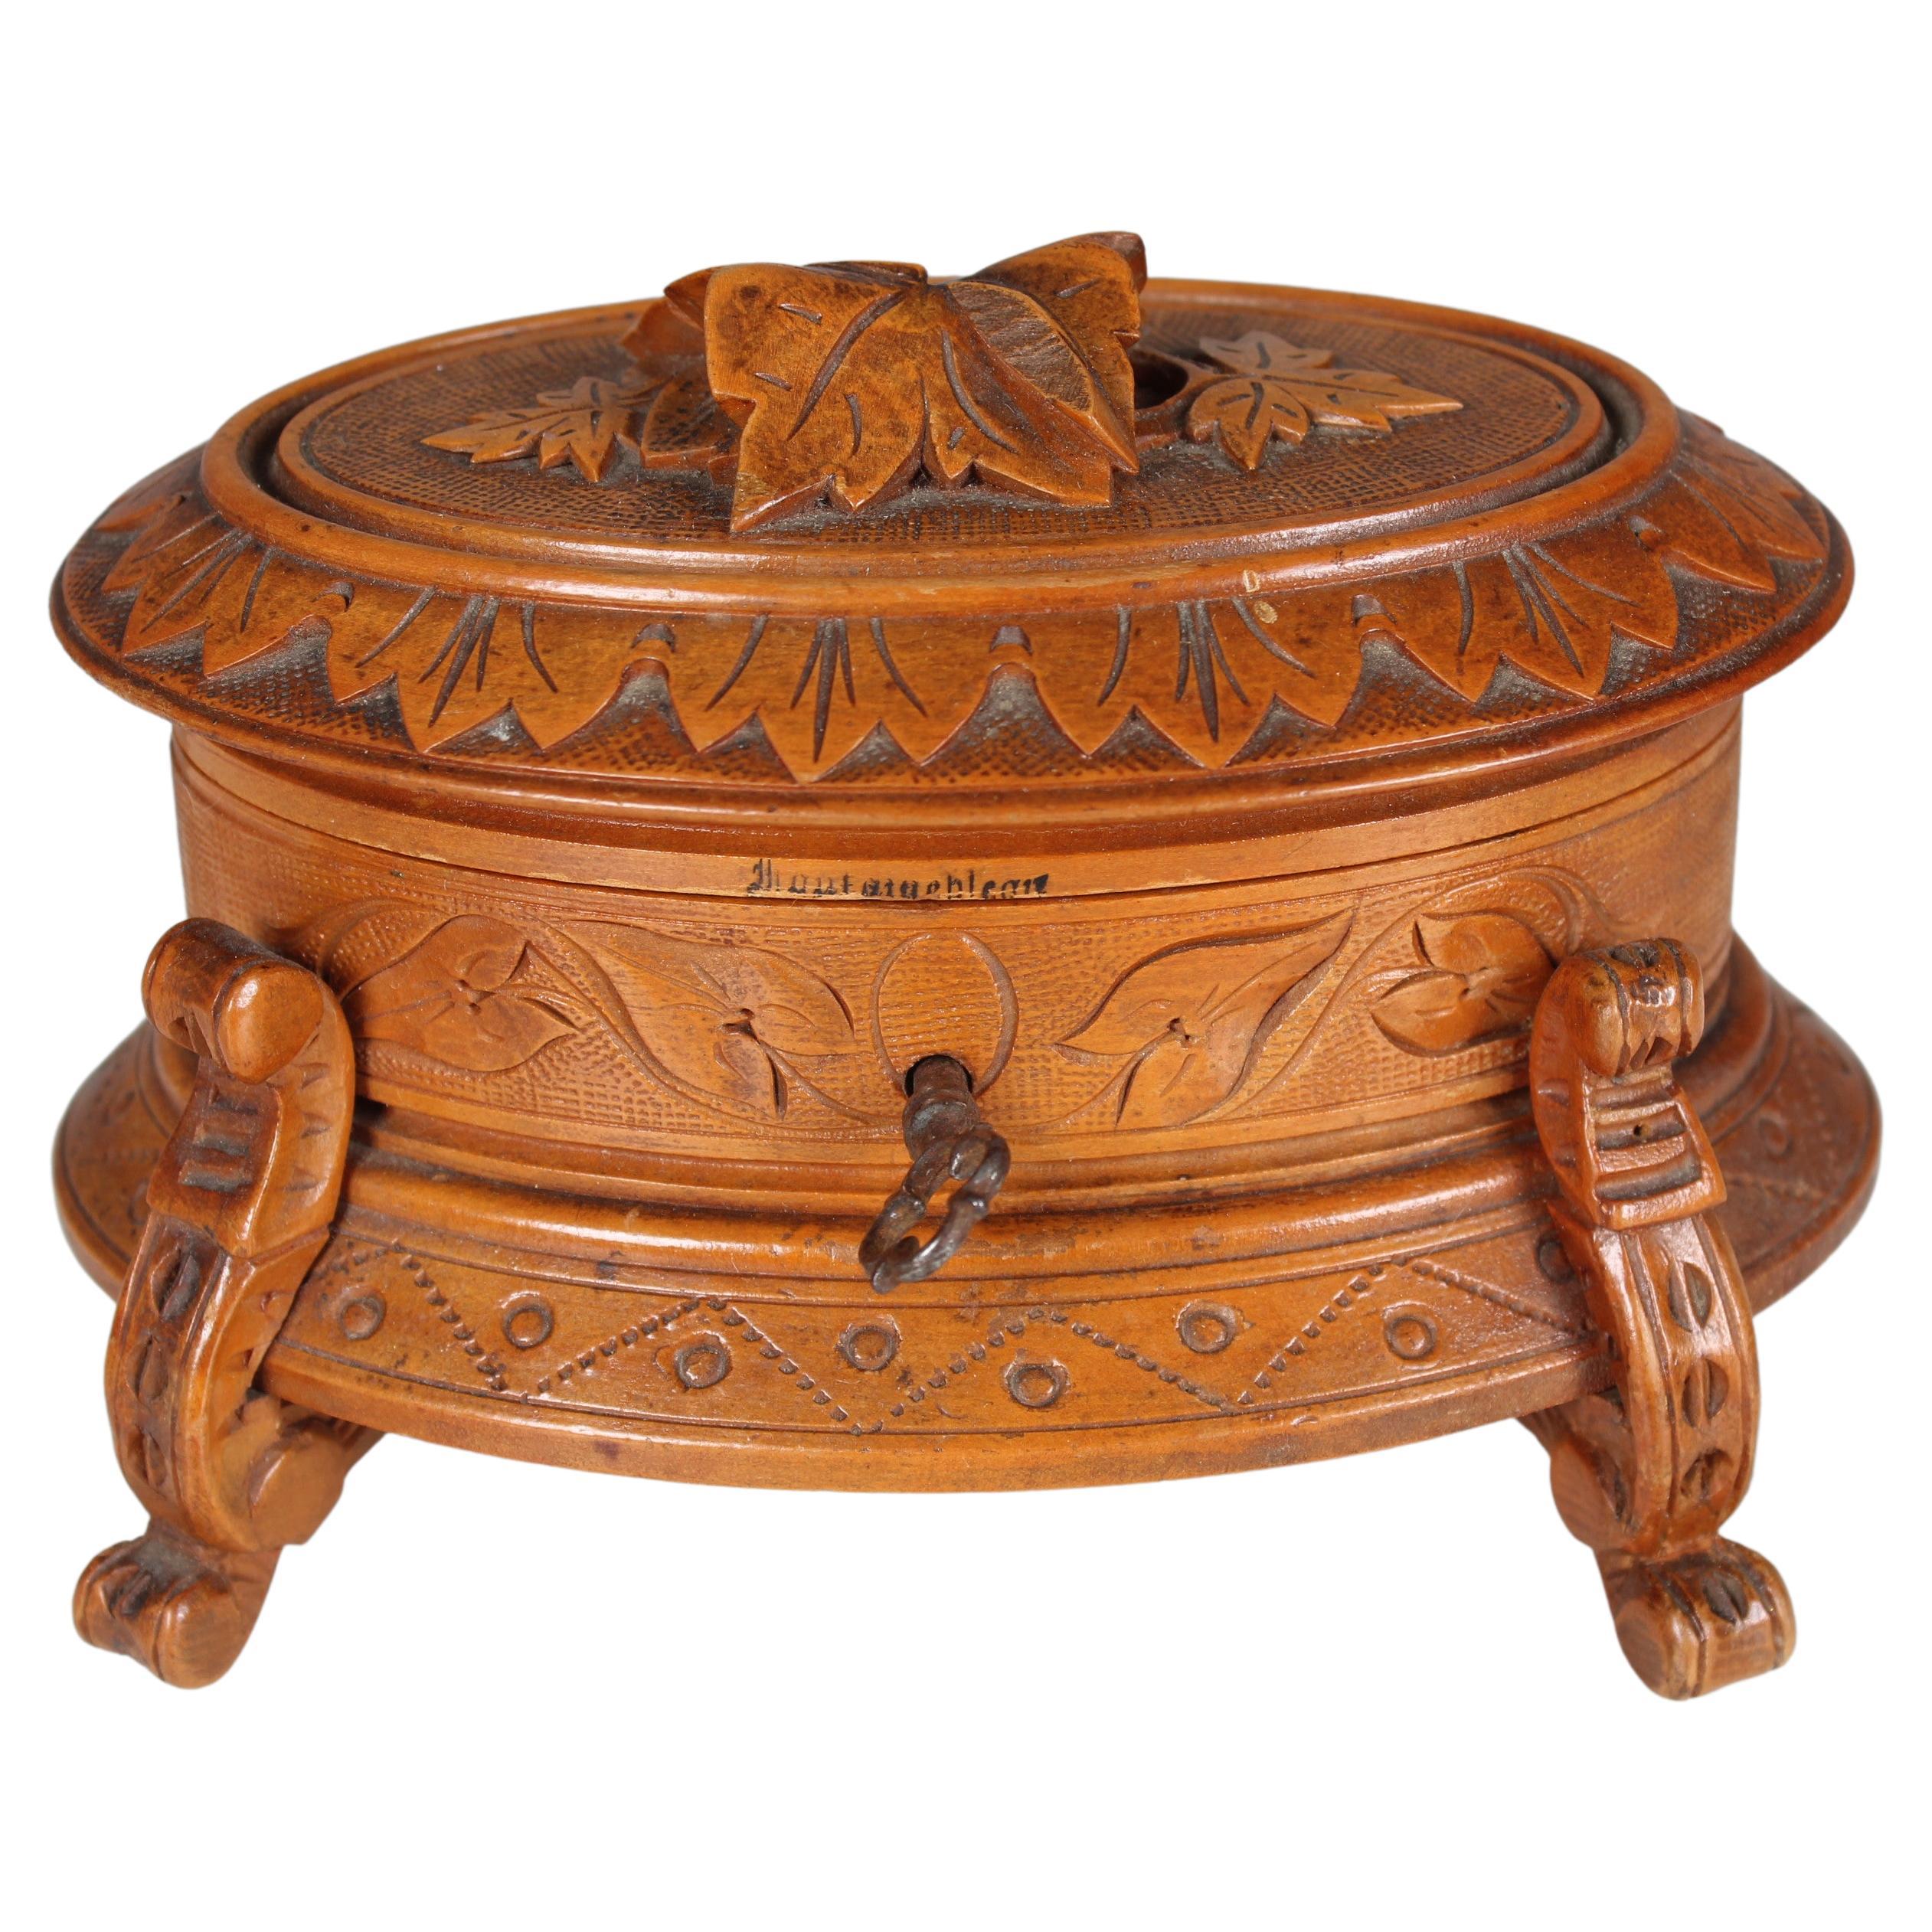 Antique Jewelry Box, Carved Wood, Fontainebleau, France, circa 1910